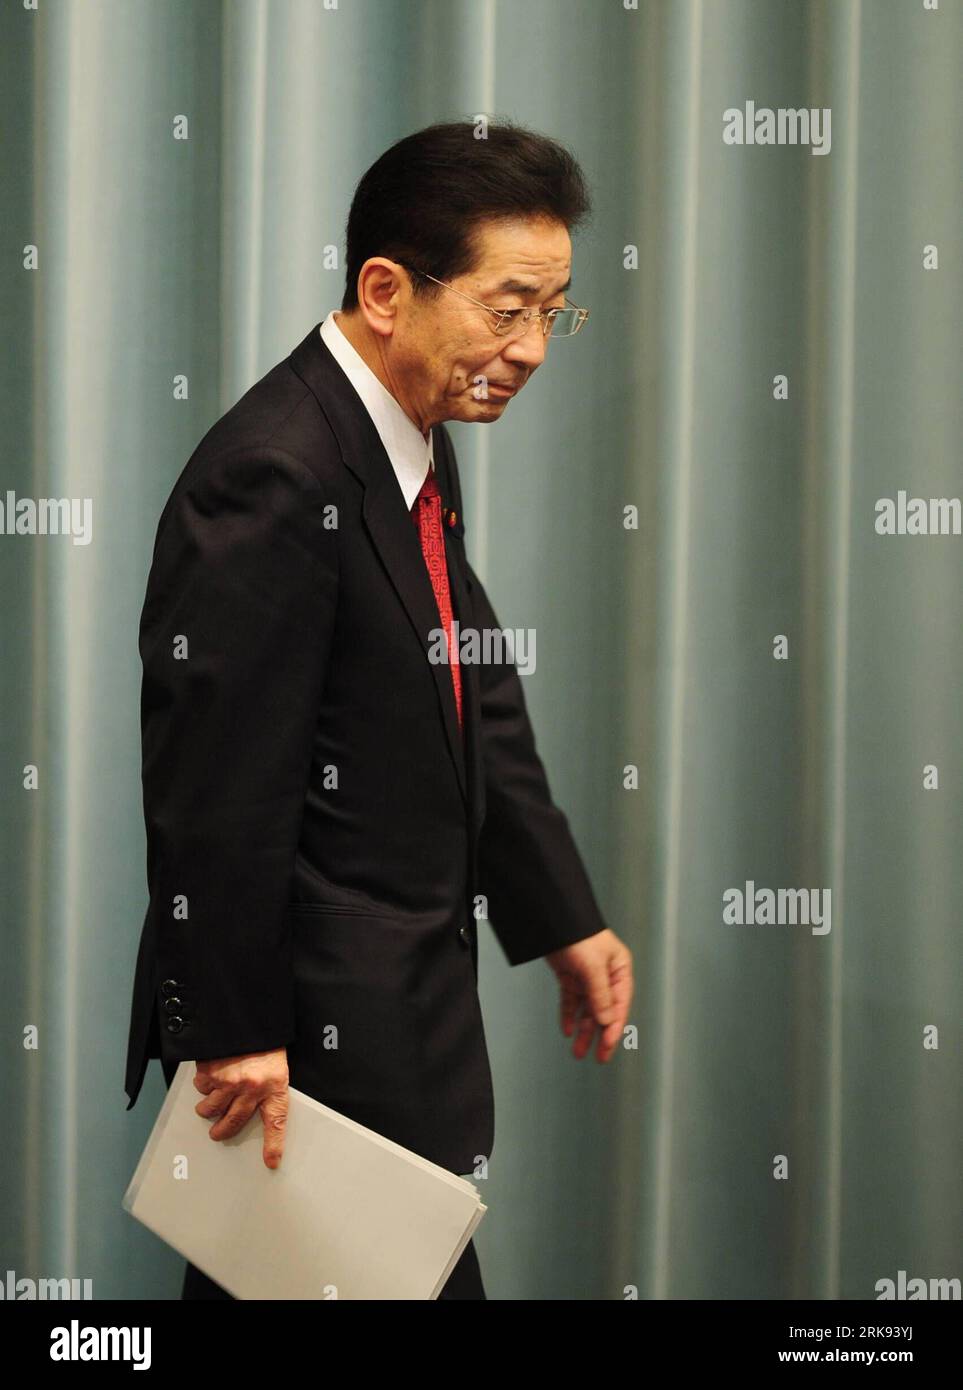 Bildnummer: 54118006  Datum: 08.06.2010  Copyright: imago/Xinhua (100608) -- TOKYO, June 8, 2010 (Xinhua) -- Newly-appointed Chief Cabinet Secretary Yoshito Sengoku leaves after announcing the lineup of Japan s new cabinet at the prime minister s official residence in Tokyo, capital of Japan, on June 8, 2010. (Xinhua/Ji Chunpeng) (zl) (4)JAPAN-TOKYO-NEW CABINET-LINEUP PUBLICATIONxNOTxINxCHN People Politik kbdig xsk 2010 hoch premiumd xint     Bildnummer 54118006 Date 08 06 2010 Copyright Imago XINHUA  Tokyo June 8 2010 XINHUA newly Appointed Chief Cabinet Secretary Yoshito Sengoku Leaves After Stock Photo